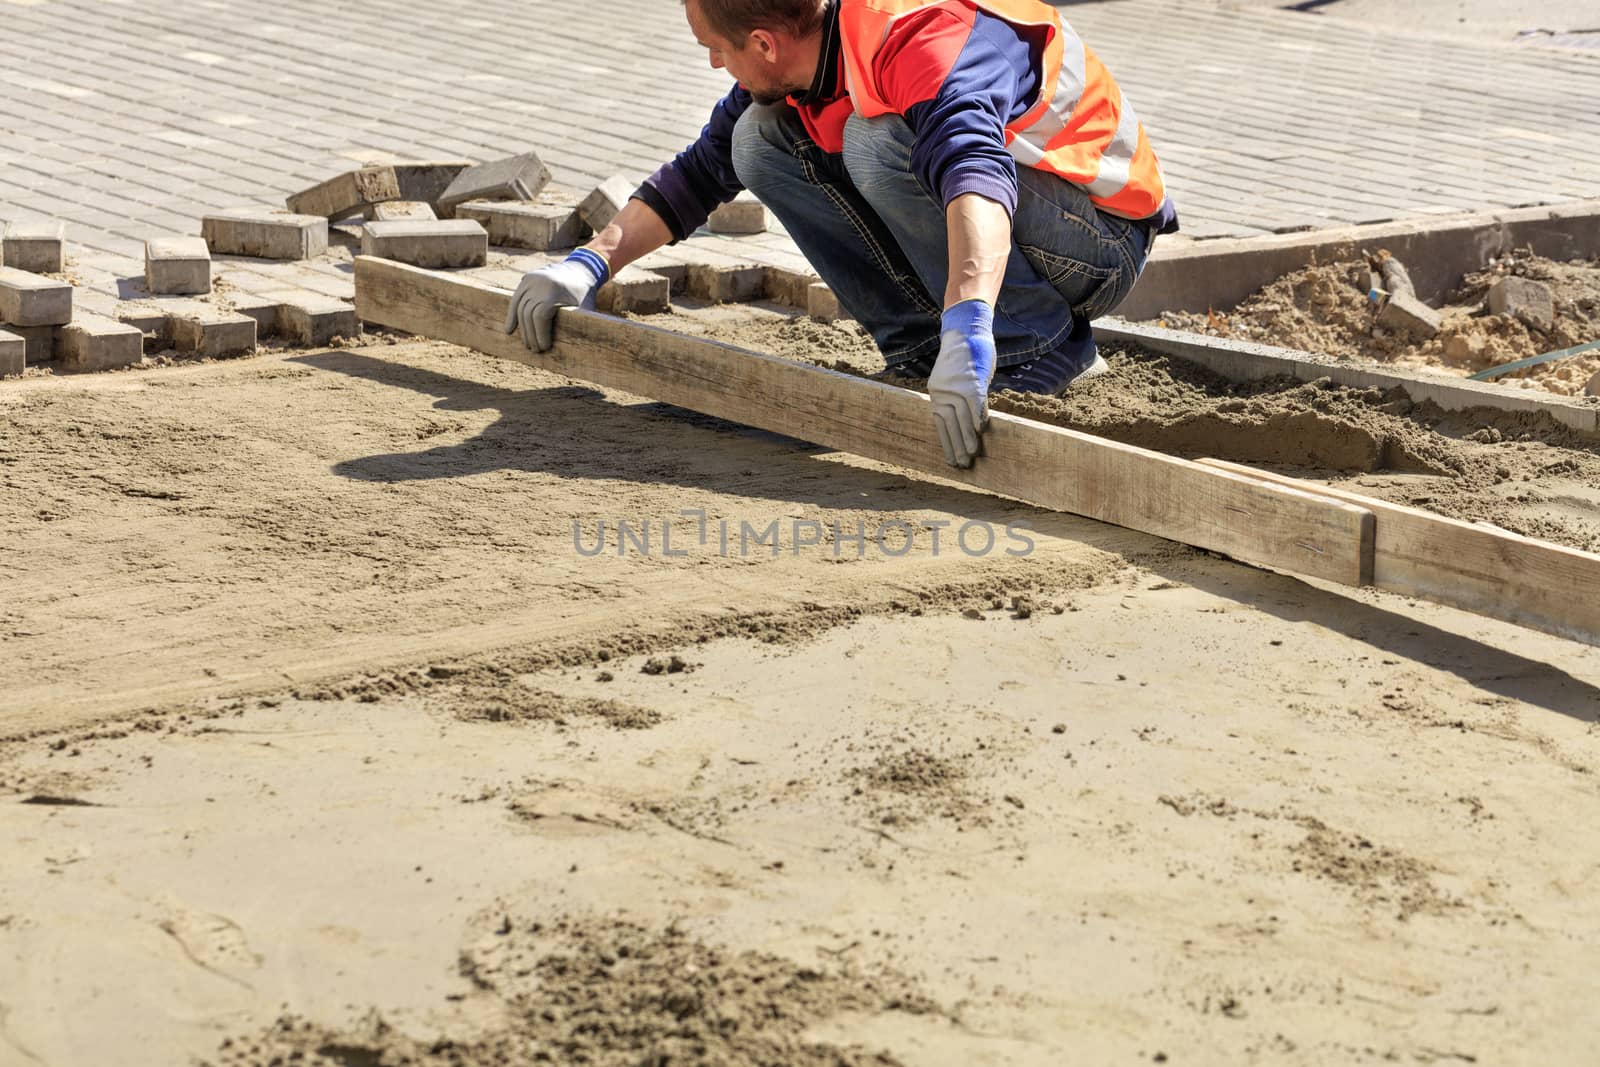 On the sidewalk, a worker aligns the sand platform with a wooden board, preparing the foundation for laying paving slabs.